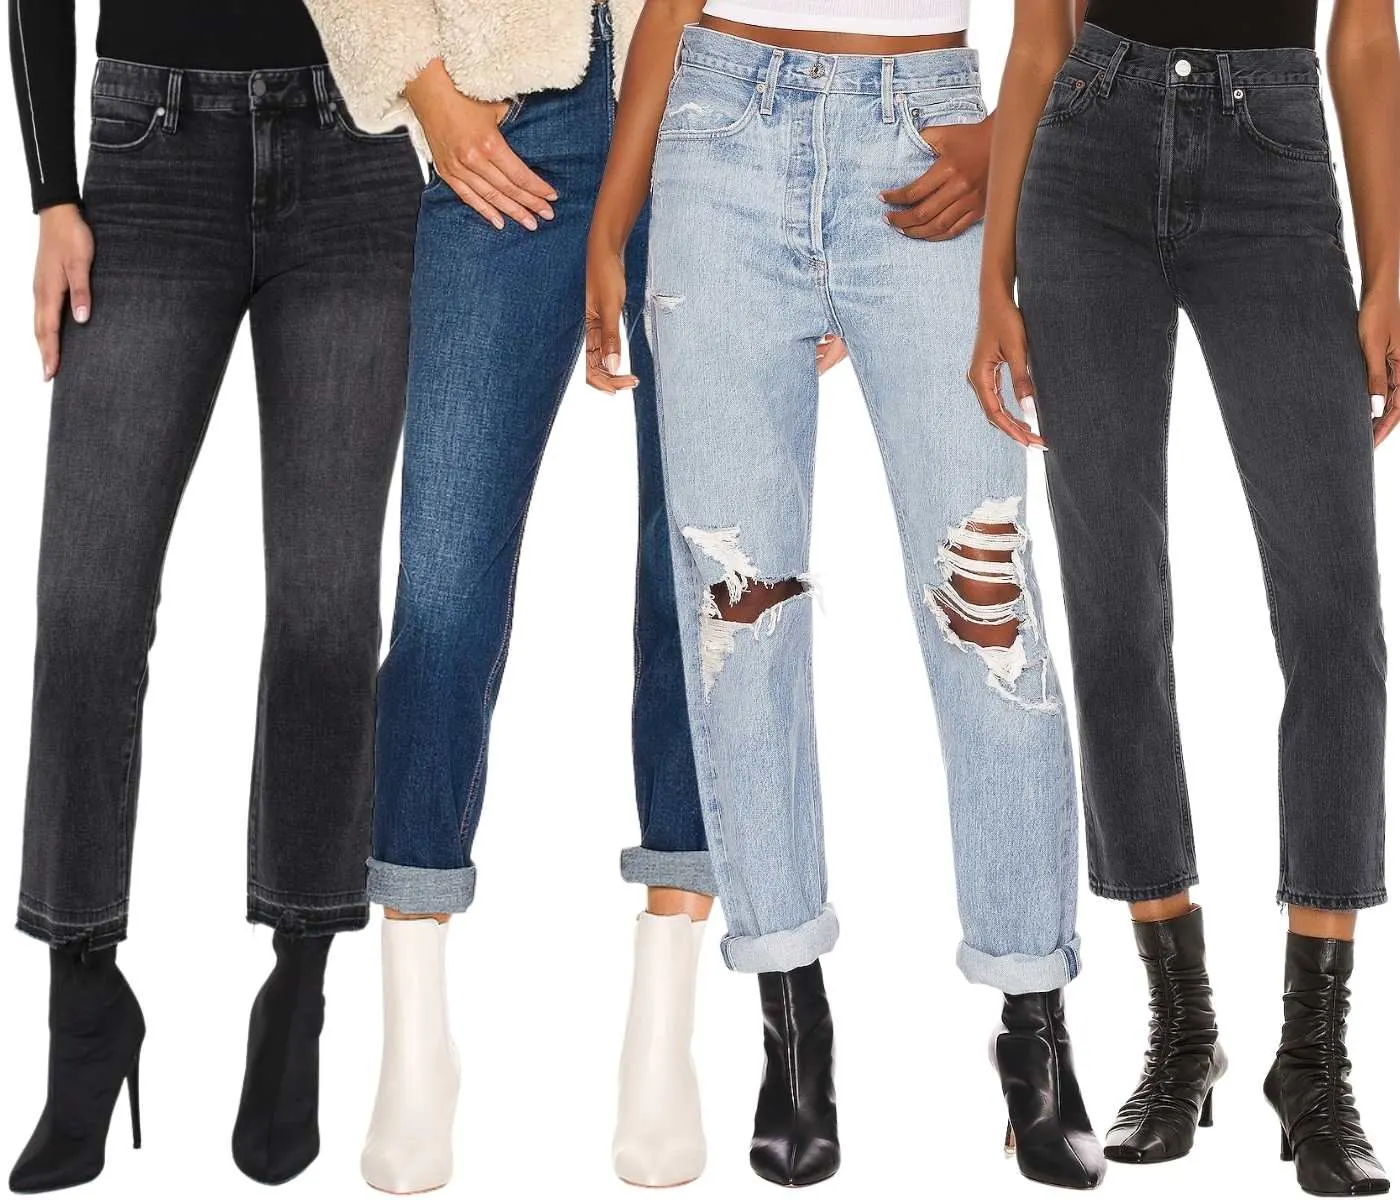 Collage of 4 women's legs wearing different ankle boots with straight leg jeans that are cropped.